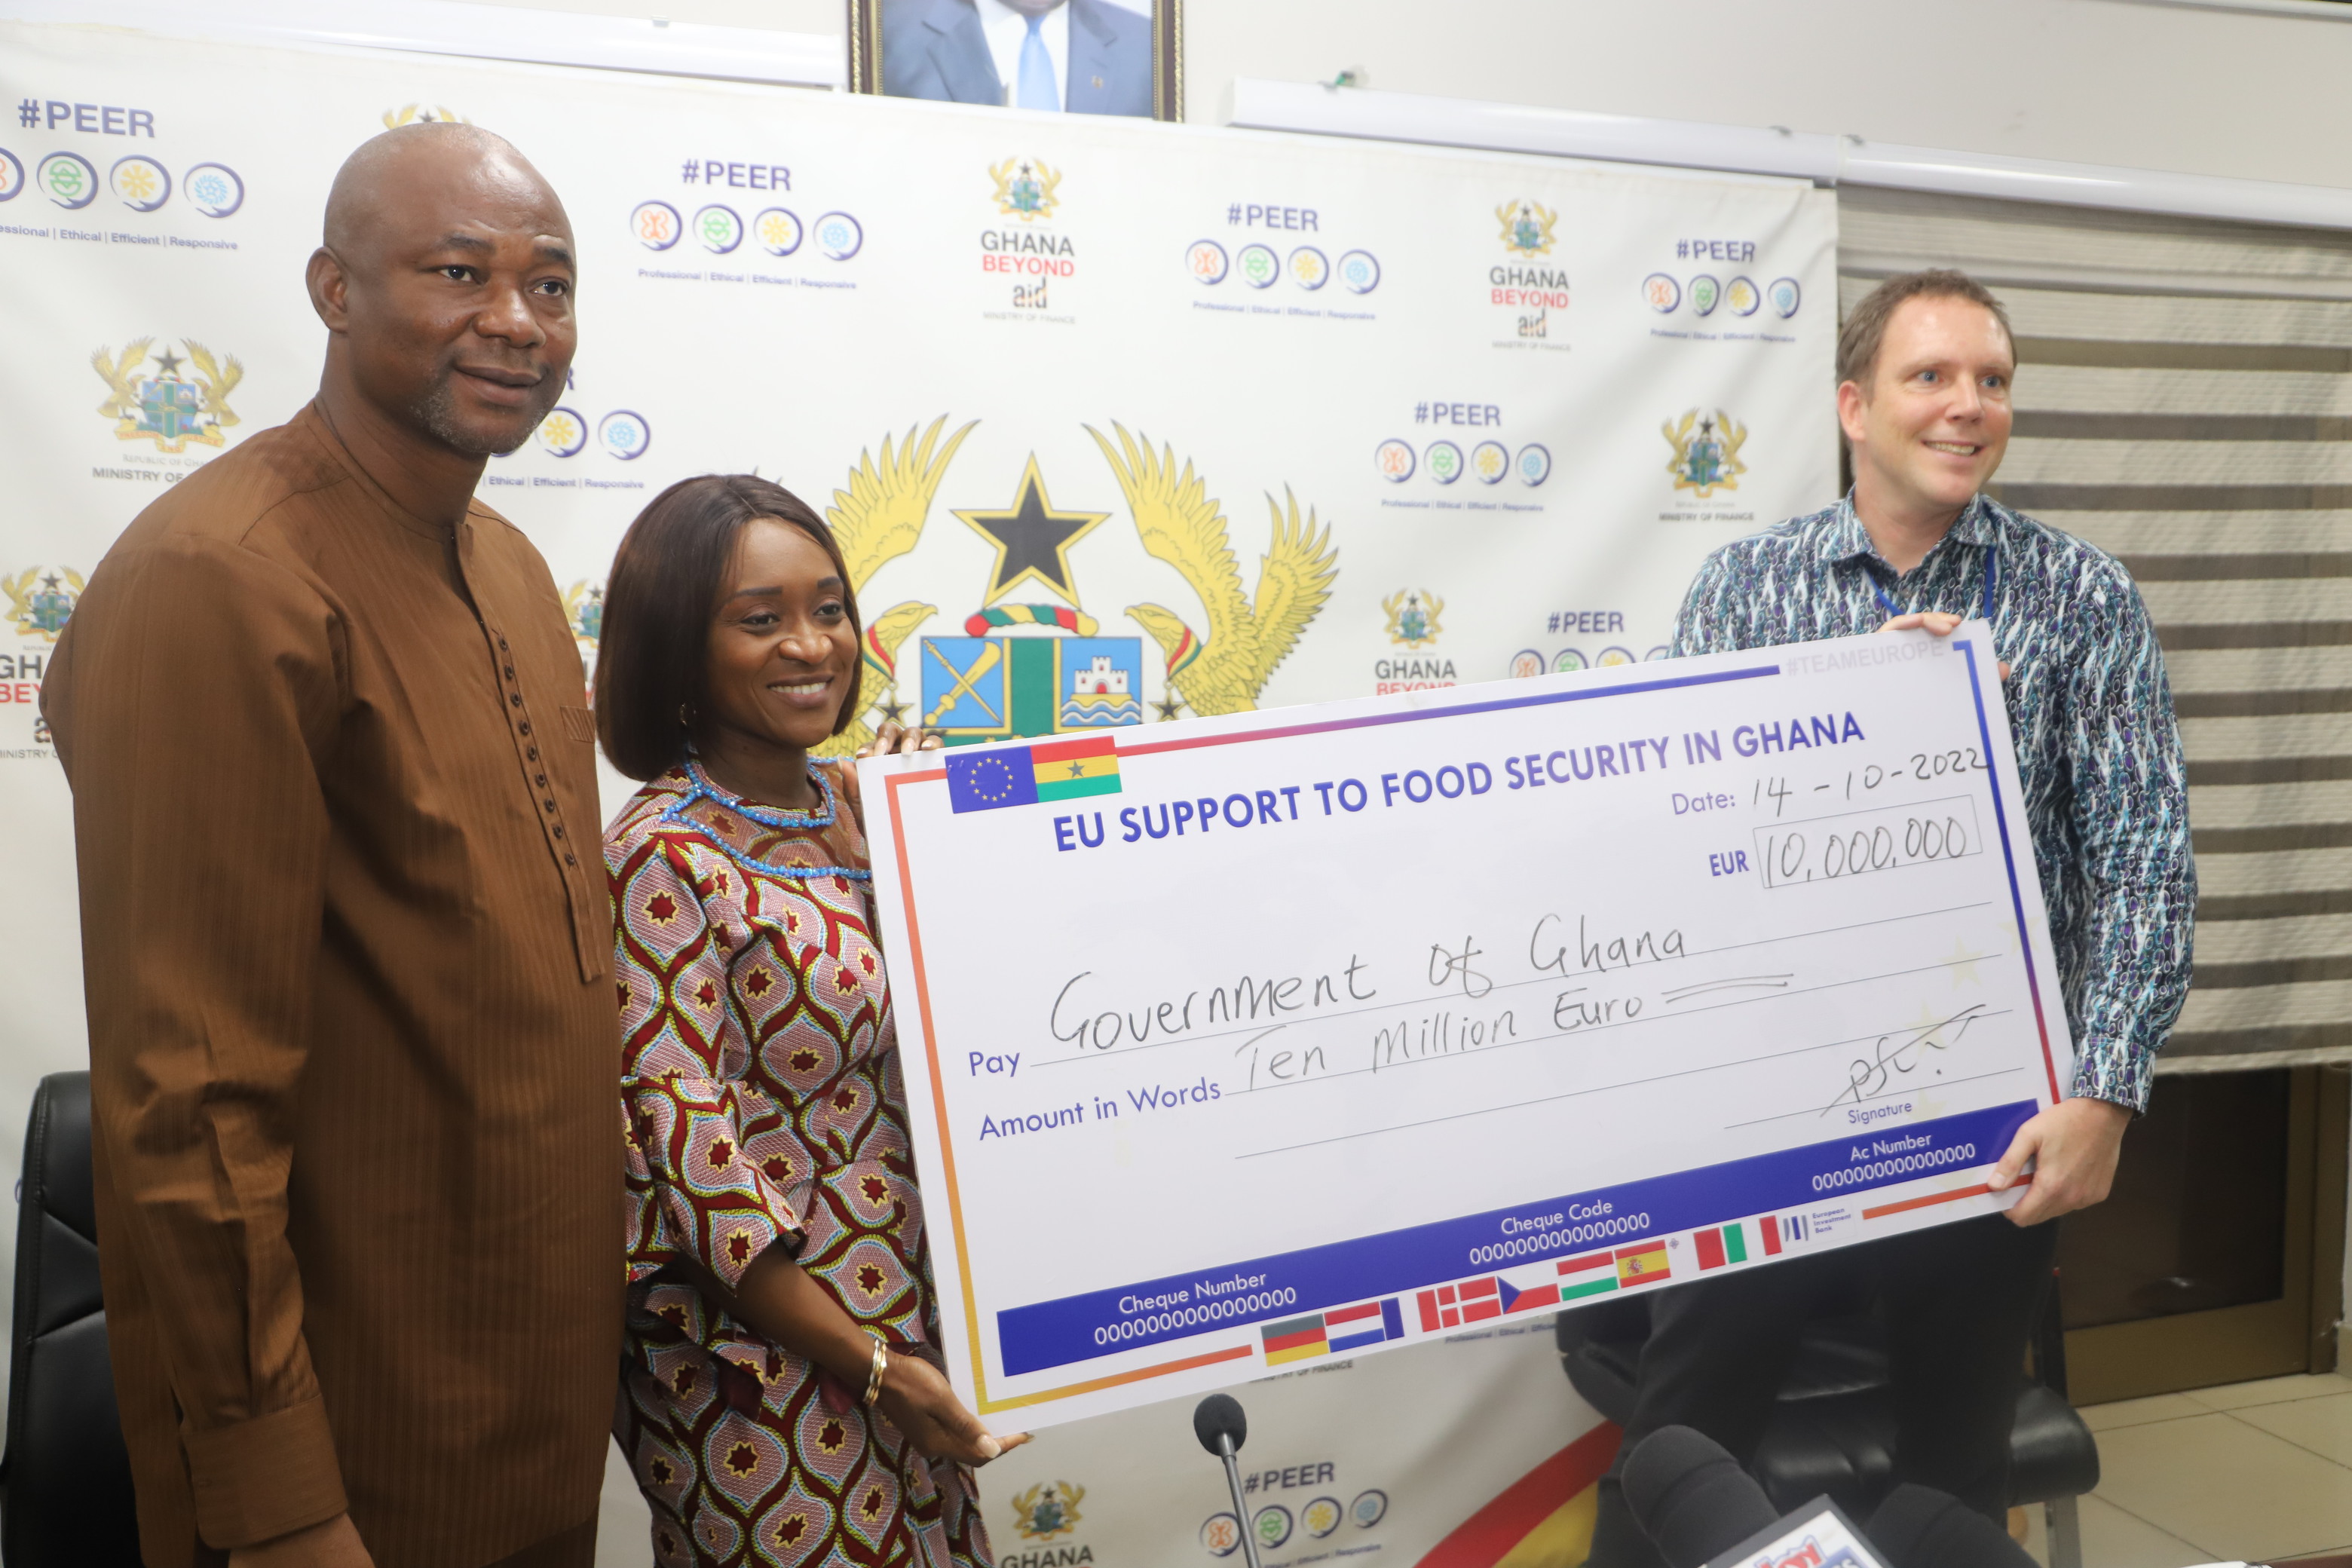 EU provides €10 million support for Ghana's food security